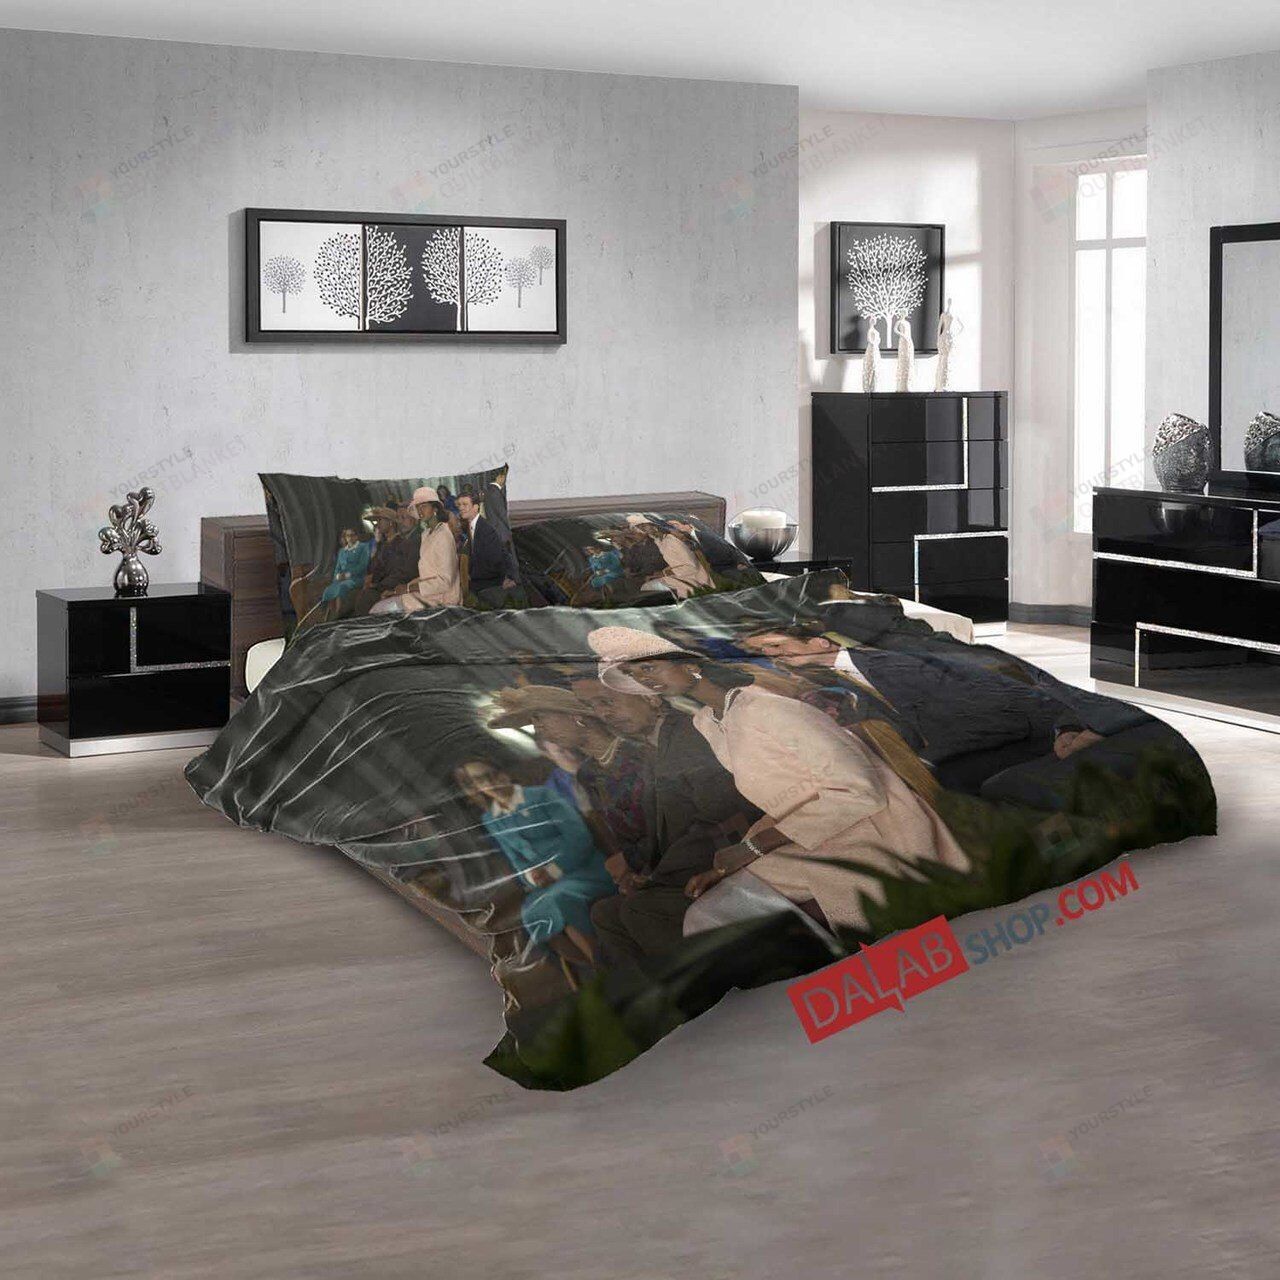 Movie Come Sunday N 3d Customized Duvet Cover Bedroom Sets Bedding Sets